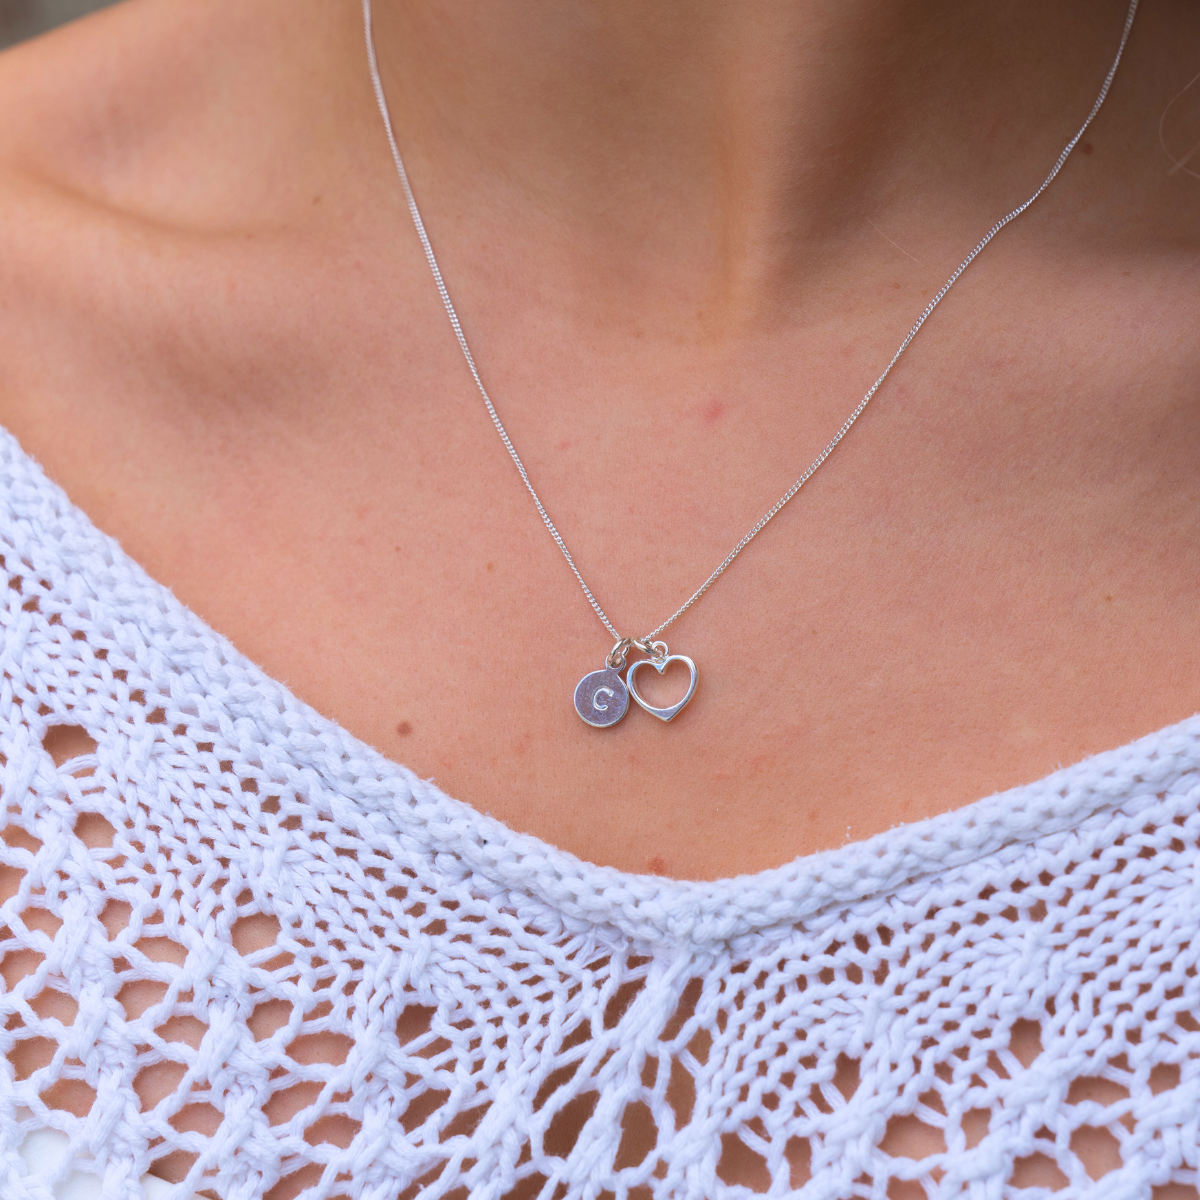 Create your own necklace in sterling silver